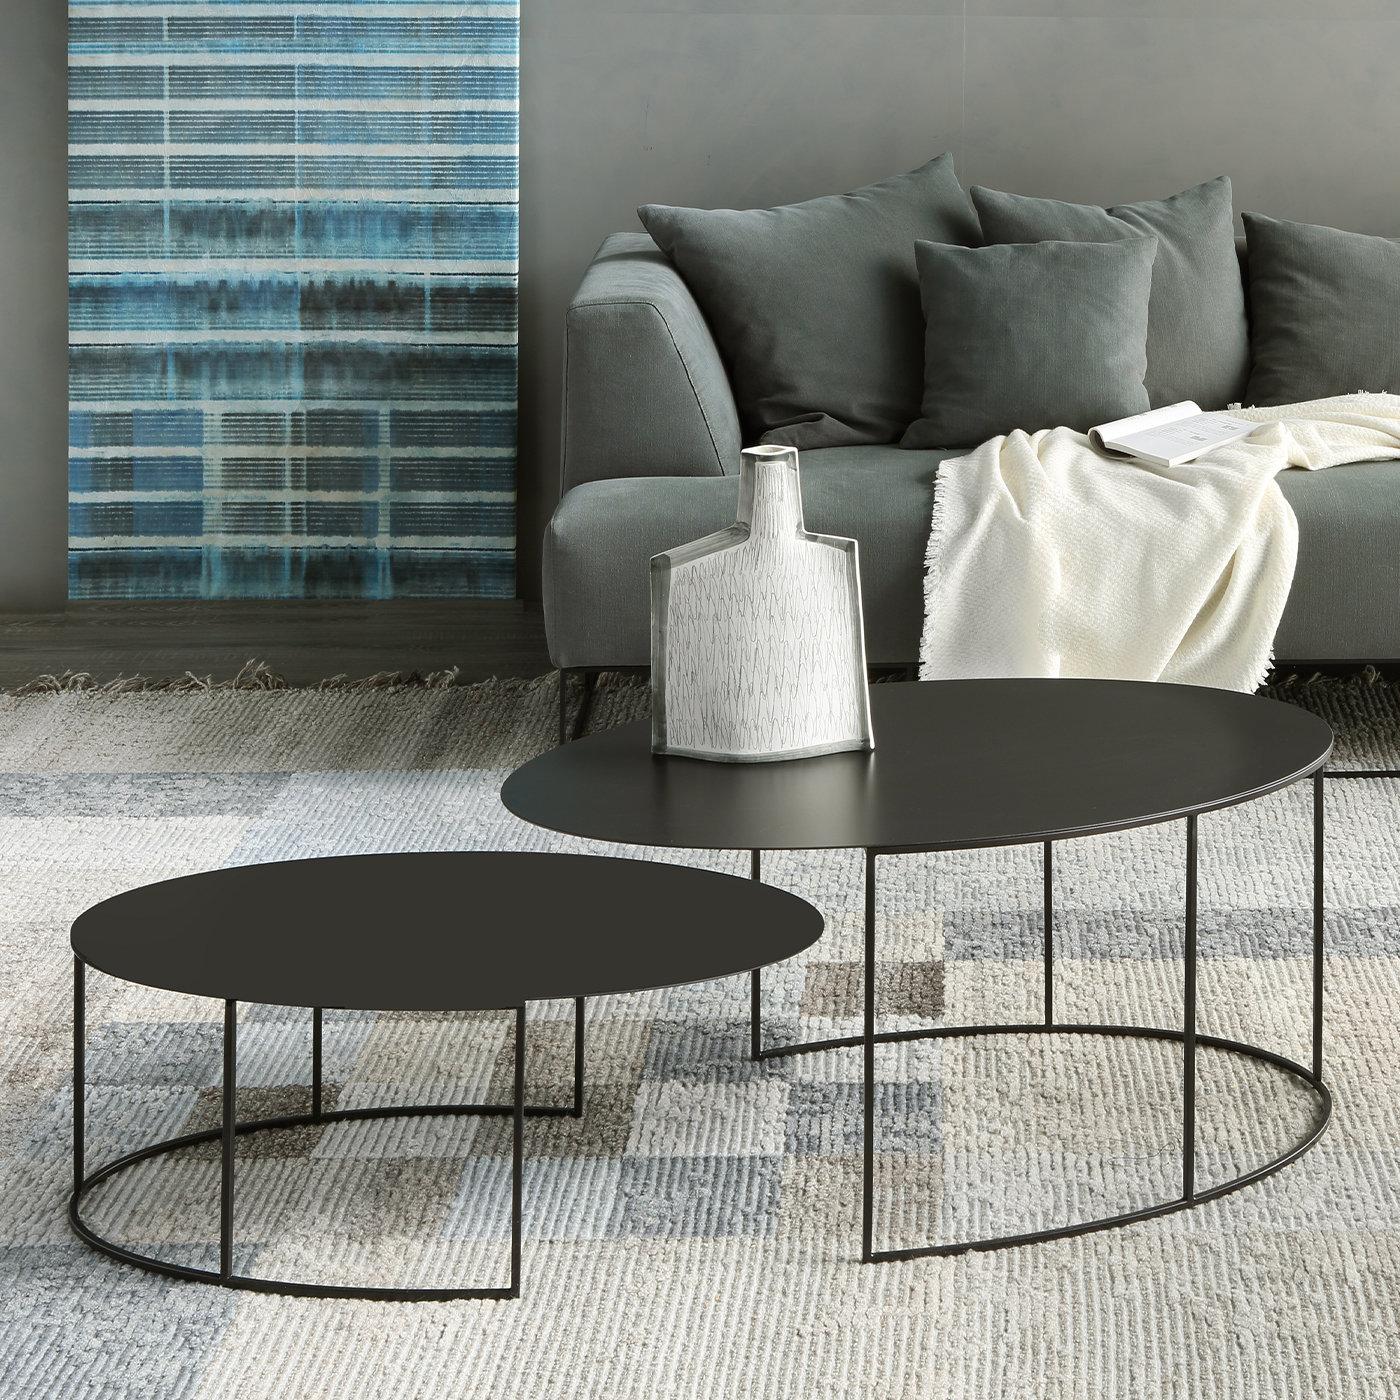 This striking set of two oval tables is designed to create an eye-catching focal point in any interior. Raised on a semicircular open base of steel tubes (8 x 8 mm) in epoxy-painted copper black with sand-texture effect, the slim oval tops (2 mm